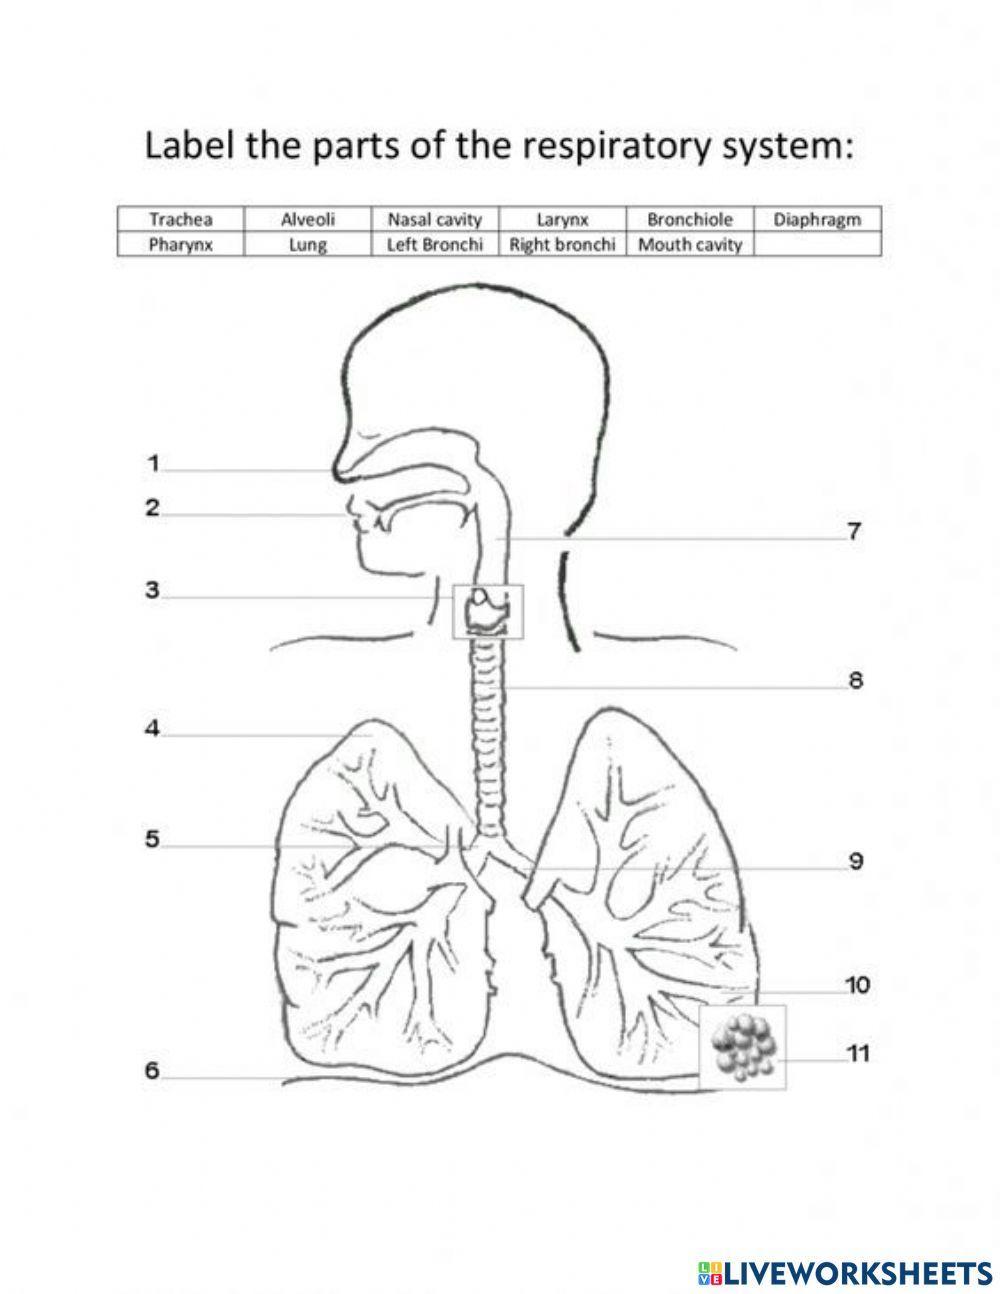 Respiratory system labeling